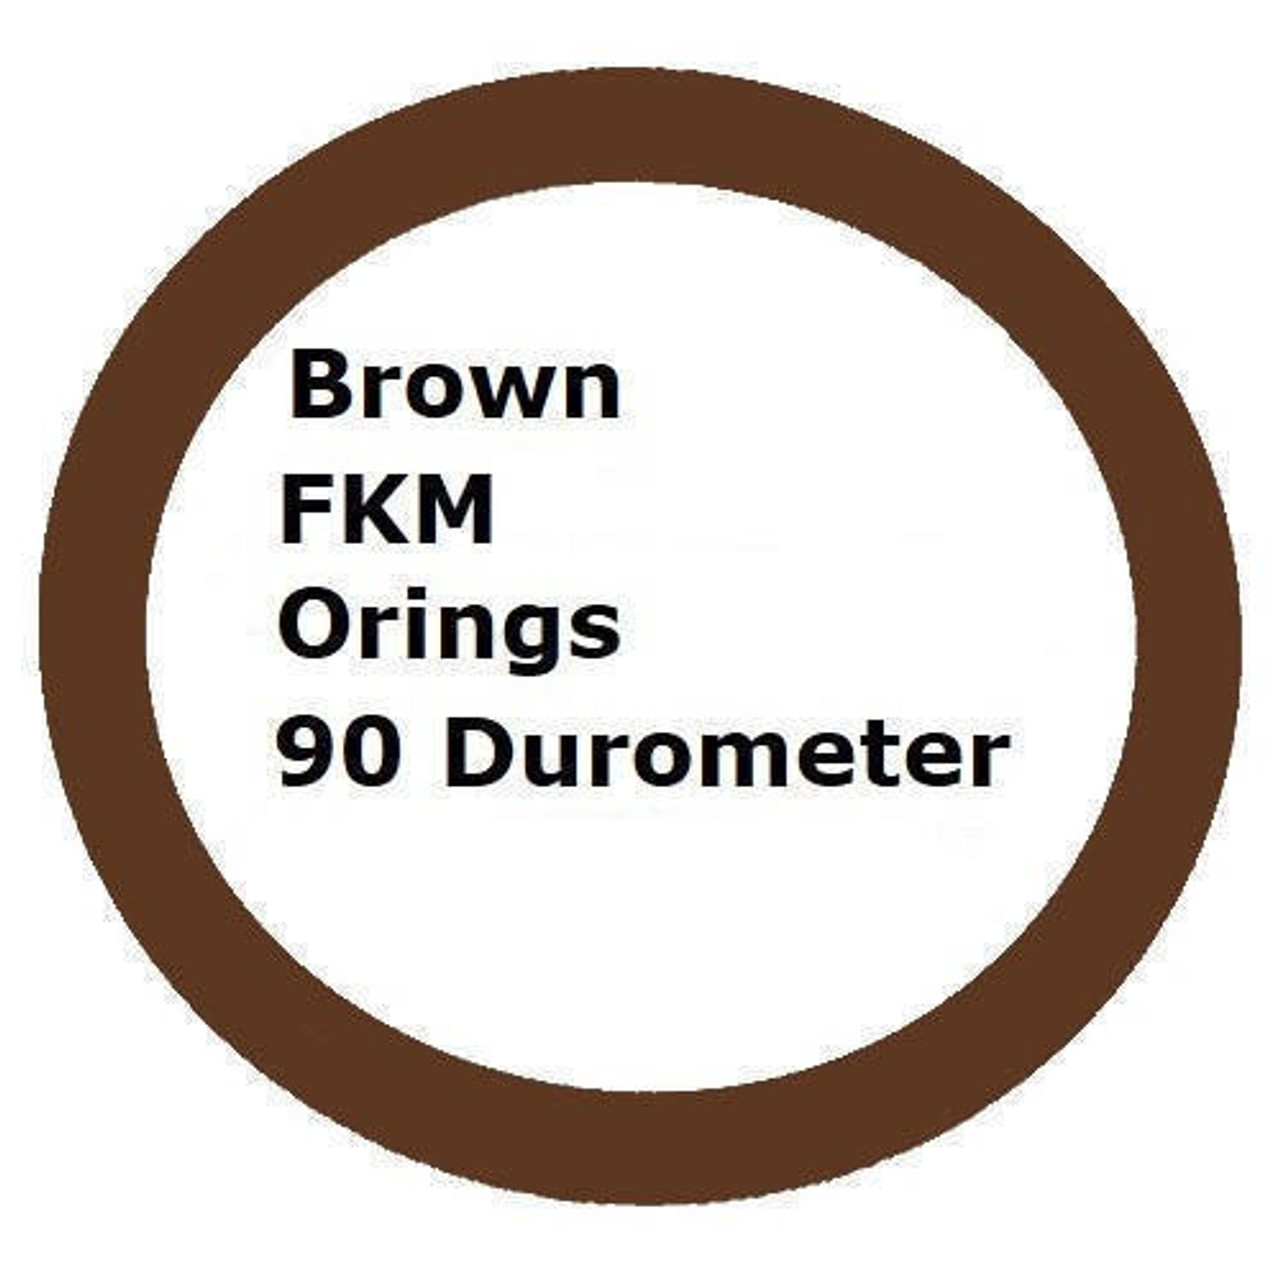 FKM 90 Brown Orings Size 233 Price for 1 pc